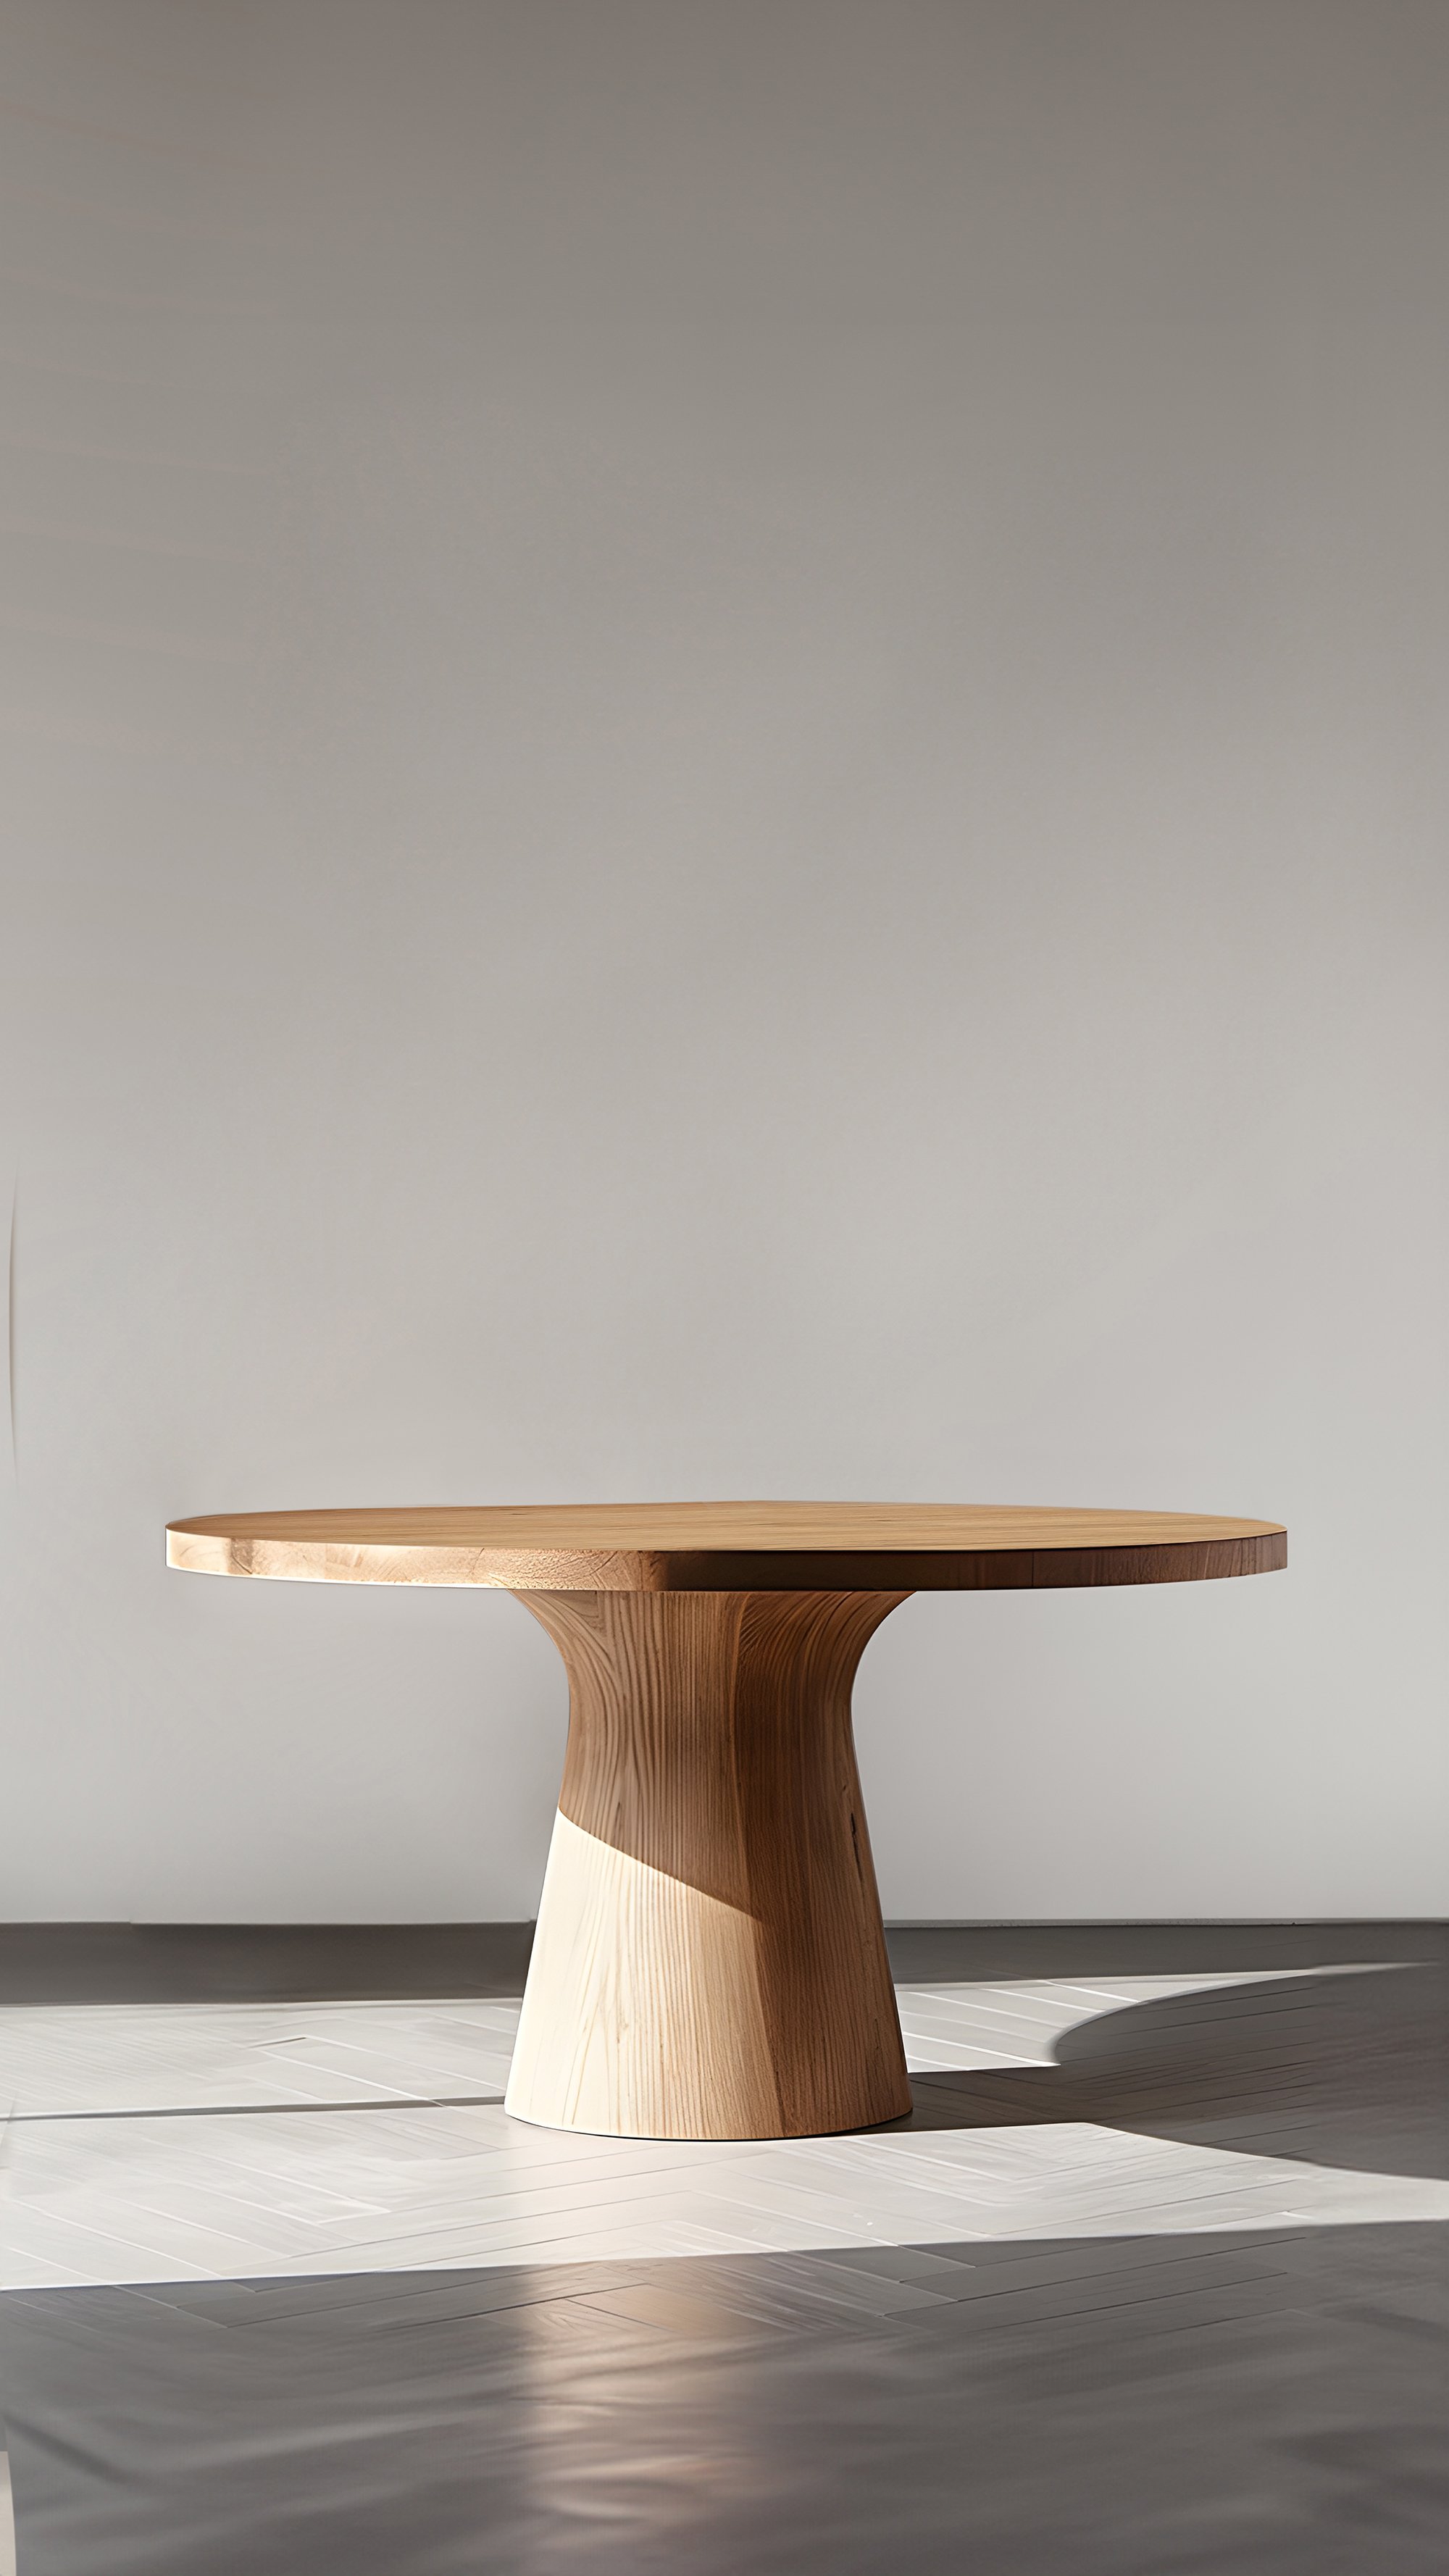 NONO's Socle Series No03, Cocktail Tables with a Wooden Twist - 6.jpg